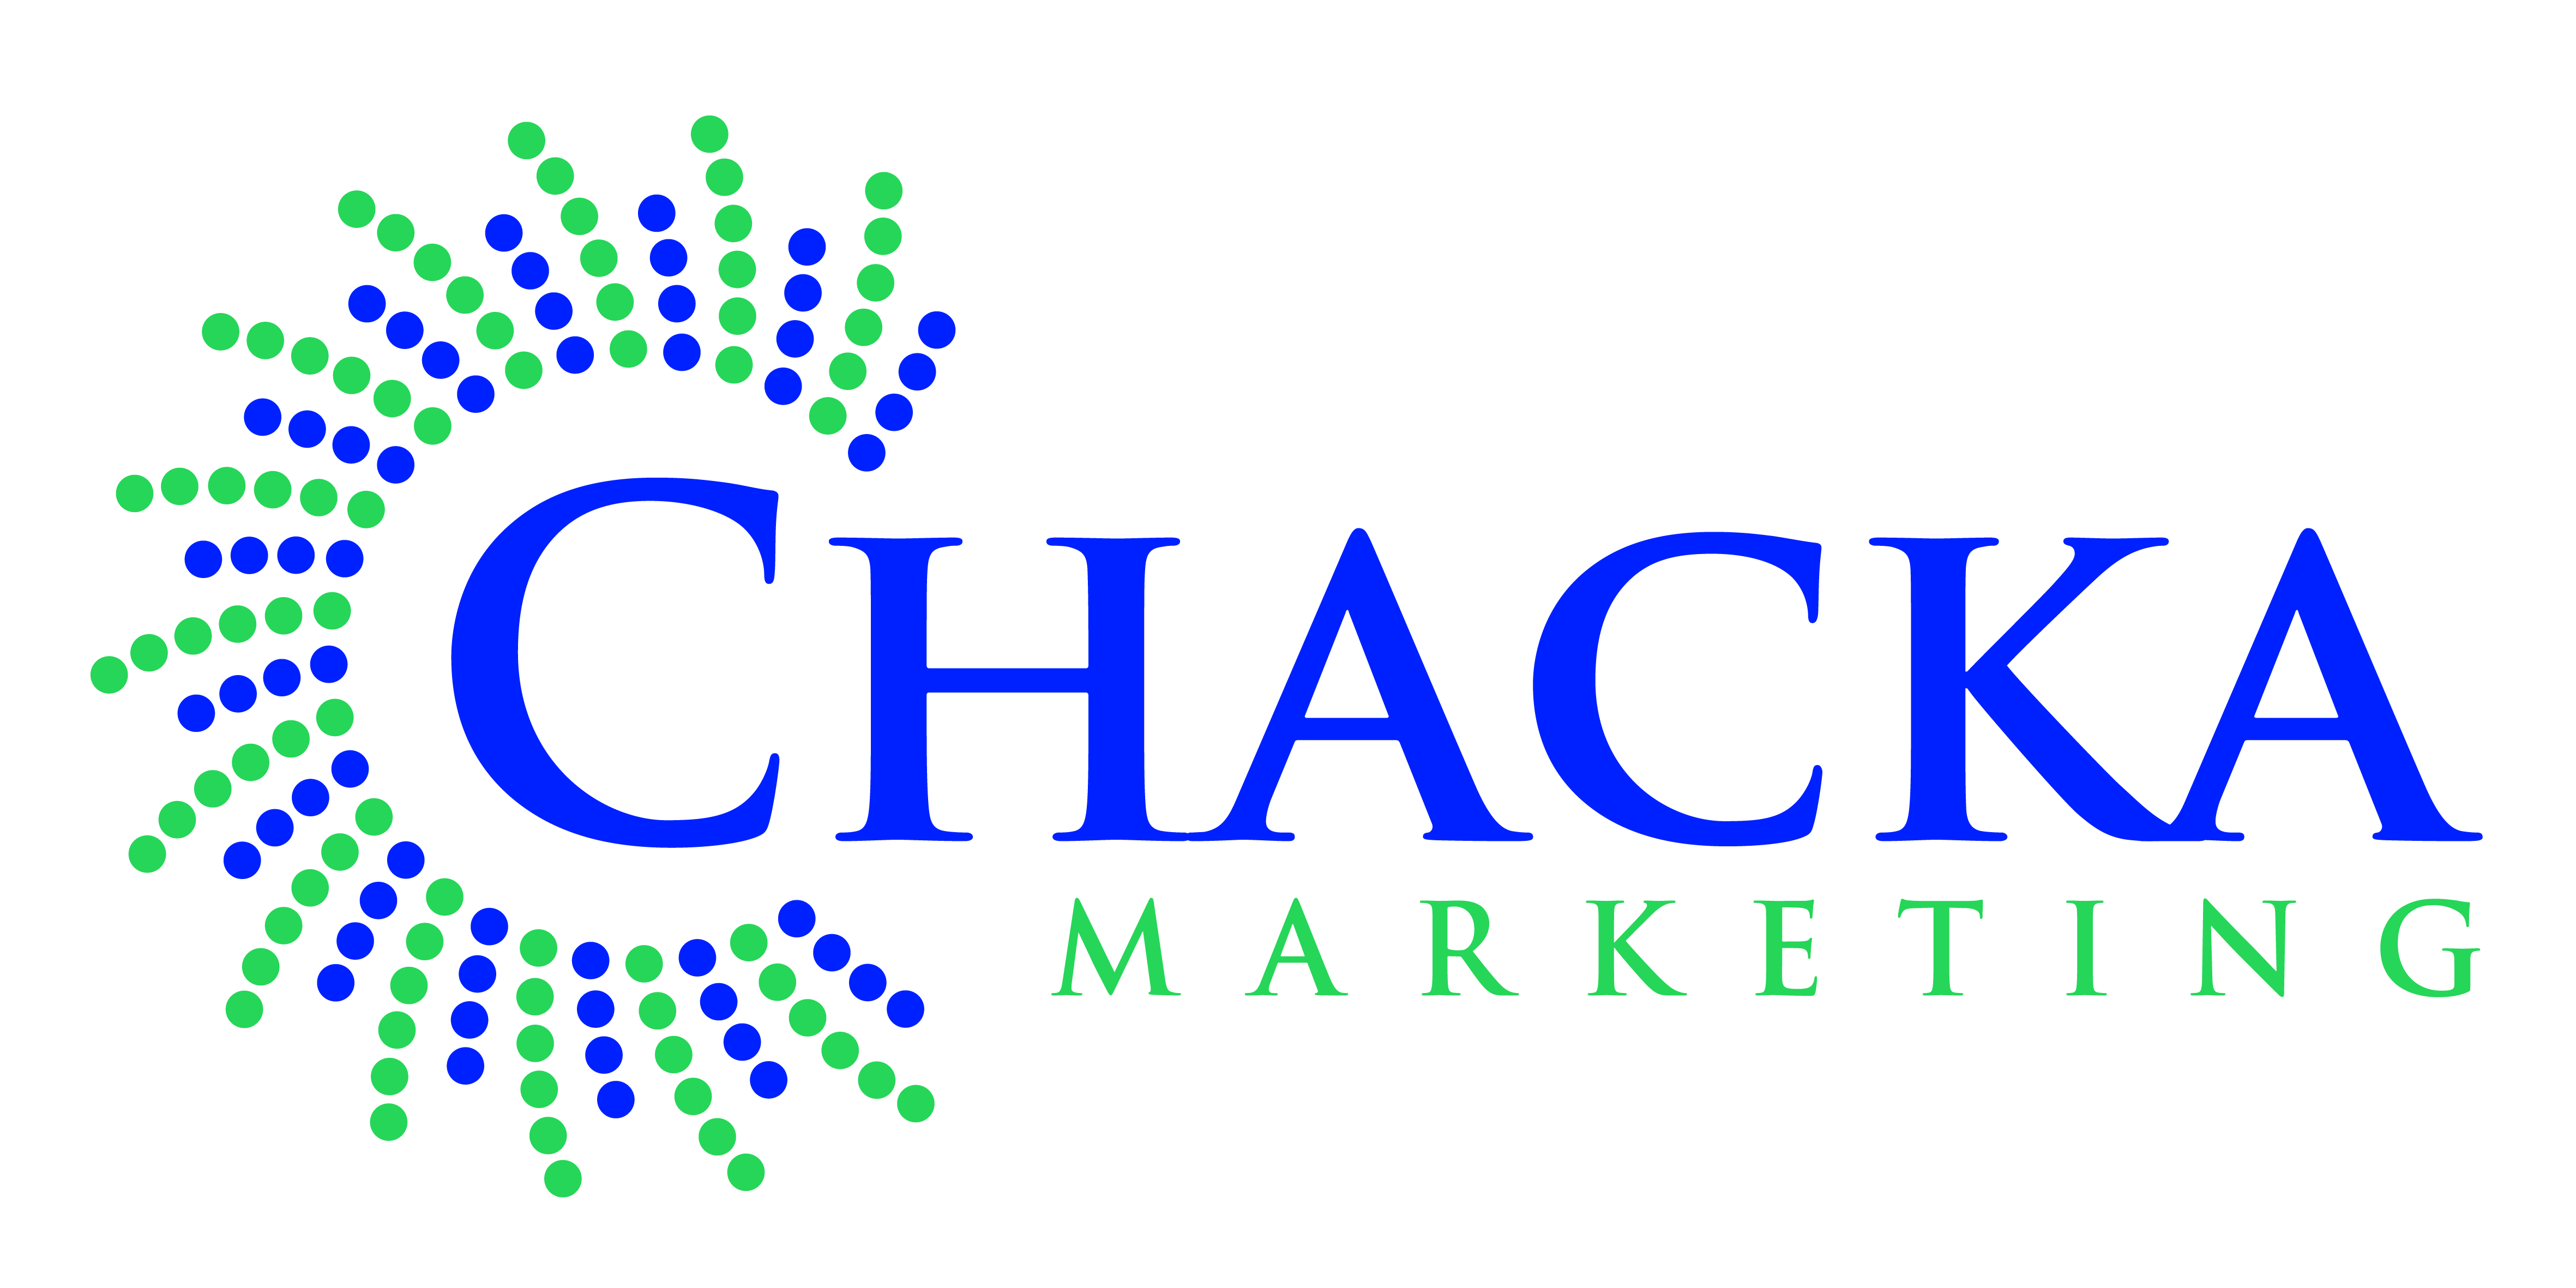 At Chacka, we pride ourselves on our forward-thinking approach to helping clients solve business problems throughout the digital marketing landscape.